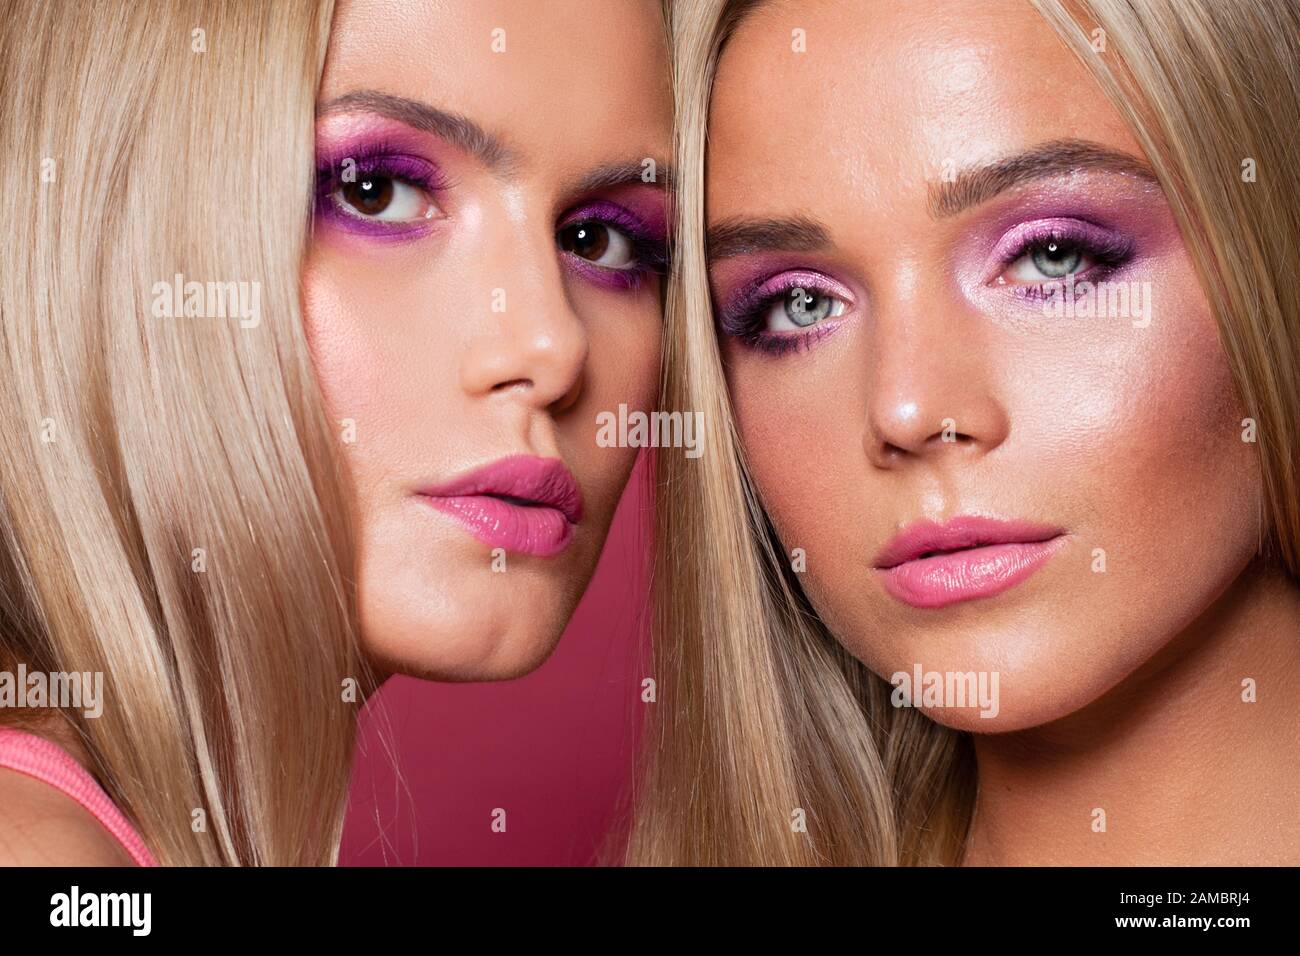 Two beautiful female faces close up portrait Stock Photo